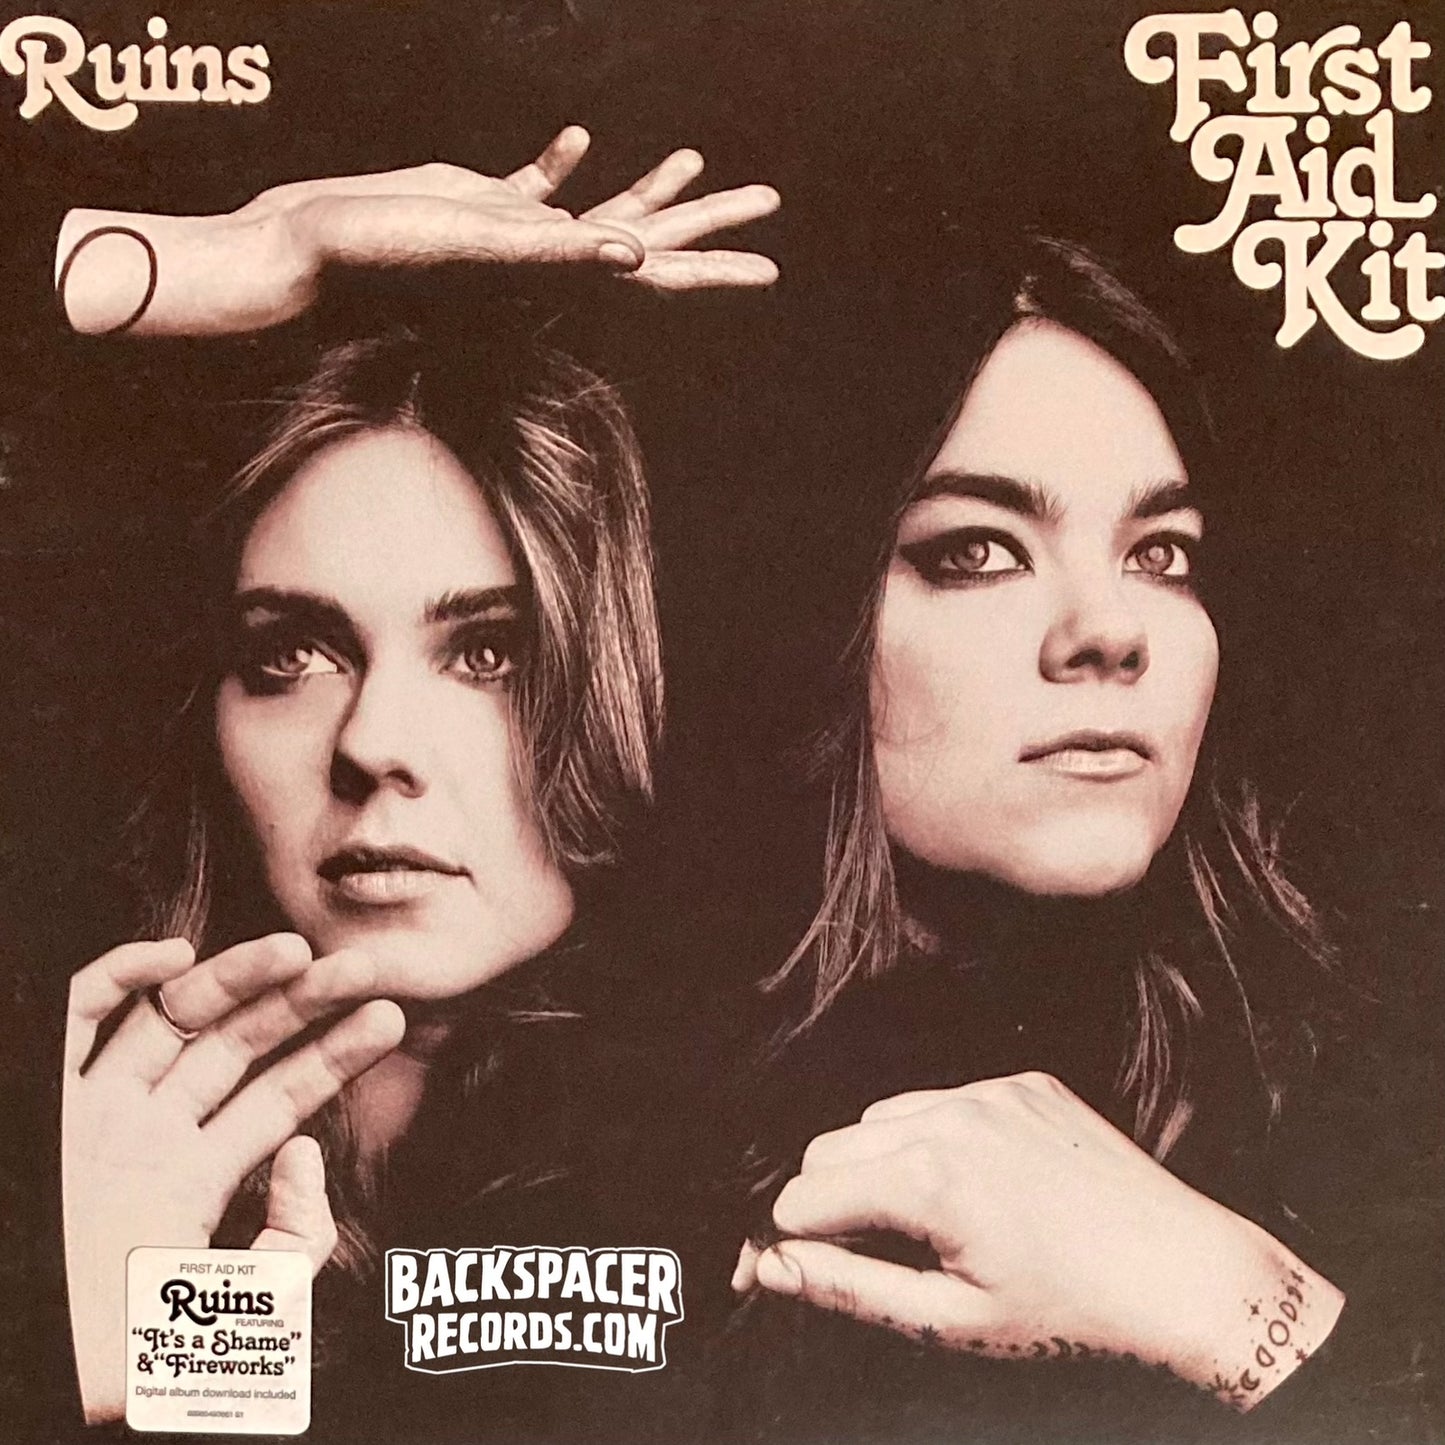 First Aid Kit - Ruins LP (Sealed)